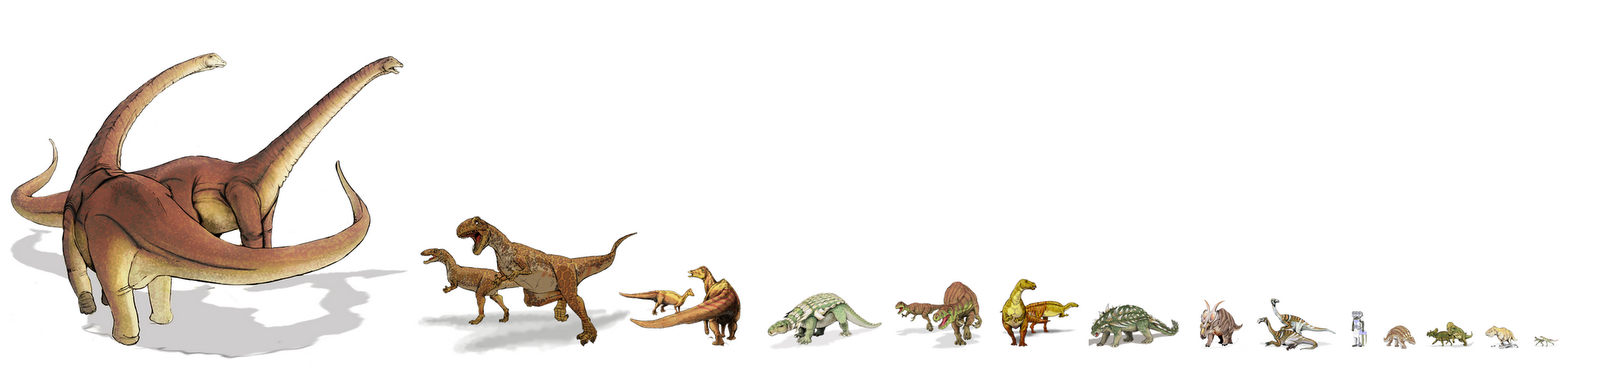 dinosaur size comparison chart image search results